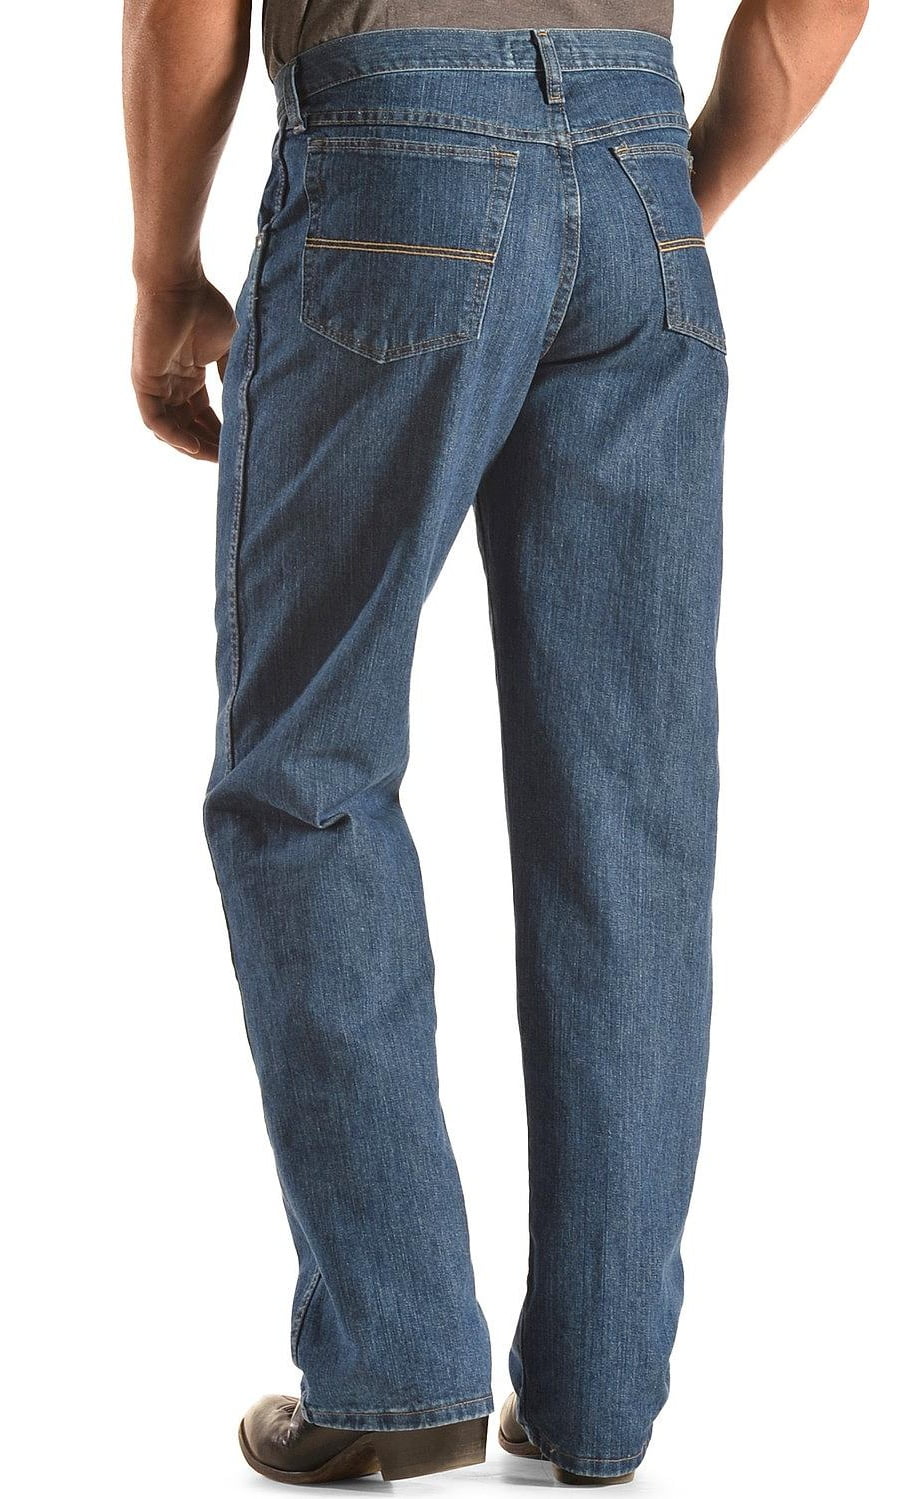 Wrangler George Strait Relaxed Fit Jeans